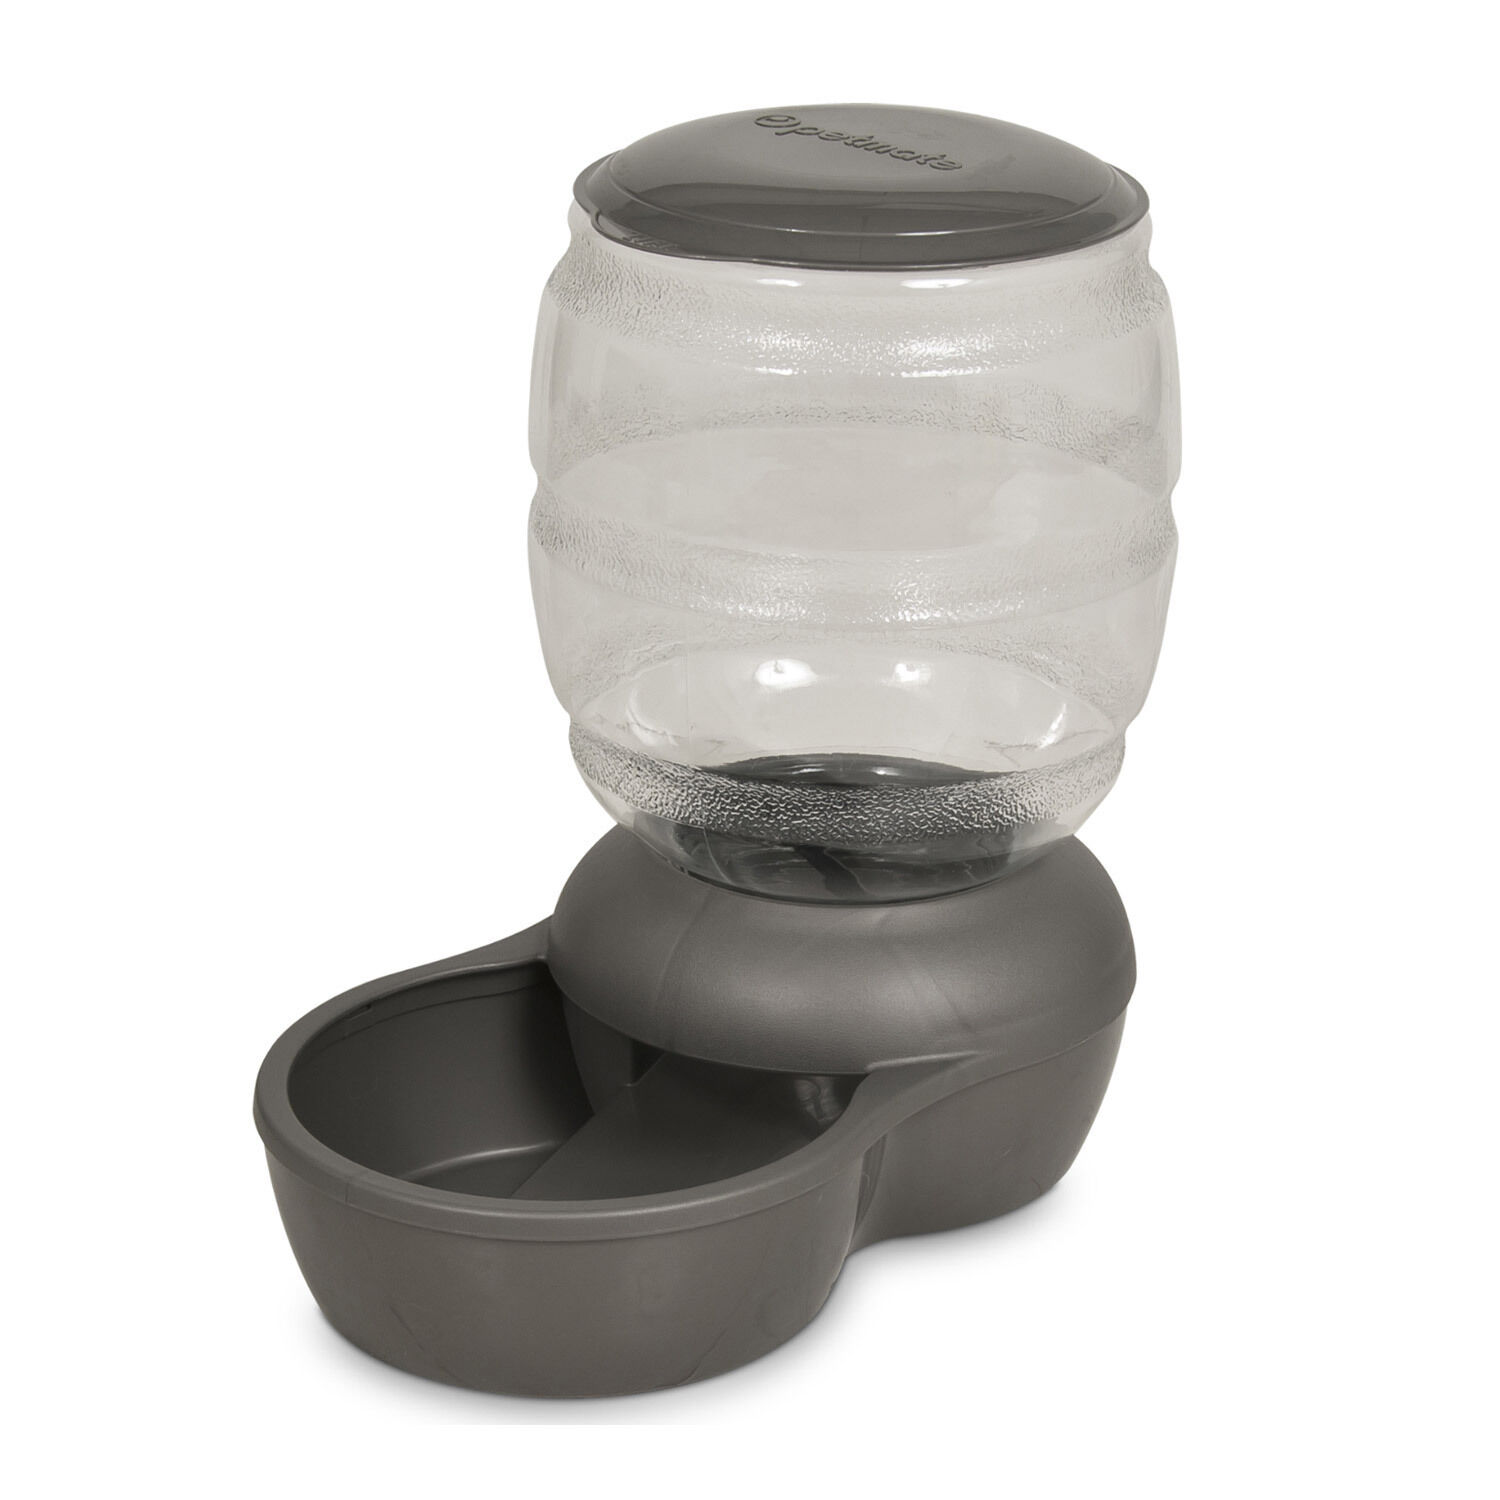 Petmate Replendish Feeder - Gray | 2 lb The Petmate Replendish Feeder with Microban simplifies life by providing a continuous flow of top load food so busy pet parents have fewer refills to make. This gravity-controlled feeder automatically lets food drop into the bowl to keep your dog or cat fed. Ideal for short stays away from home or multiple pet households. Made with PET plastic making it safe for your pet. The base features Microban Antimicrobial Protection that helps prevent the growth of stain and odor-causing bacteria. This protection provides an additional level of defense against damaging microbes. Easy to clean wide mouth bottle, base is dishwasher safe. | Petmate Replendish Feeder - Gray | 2 lb